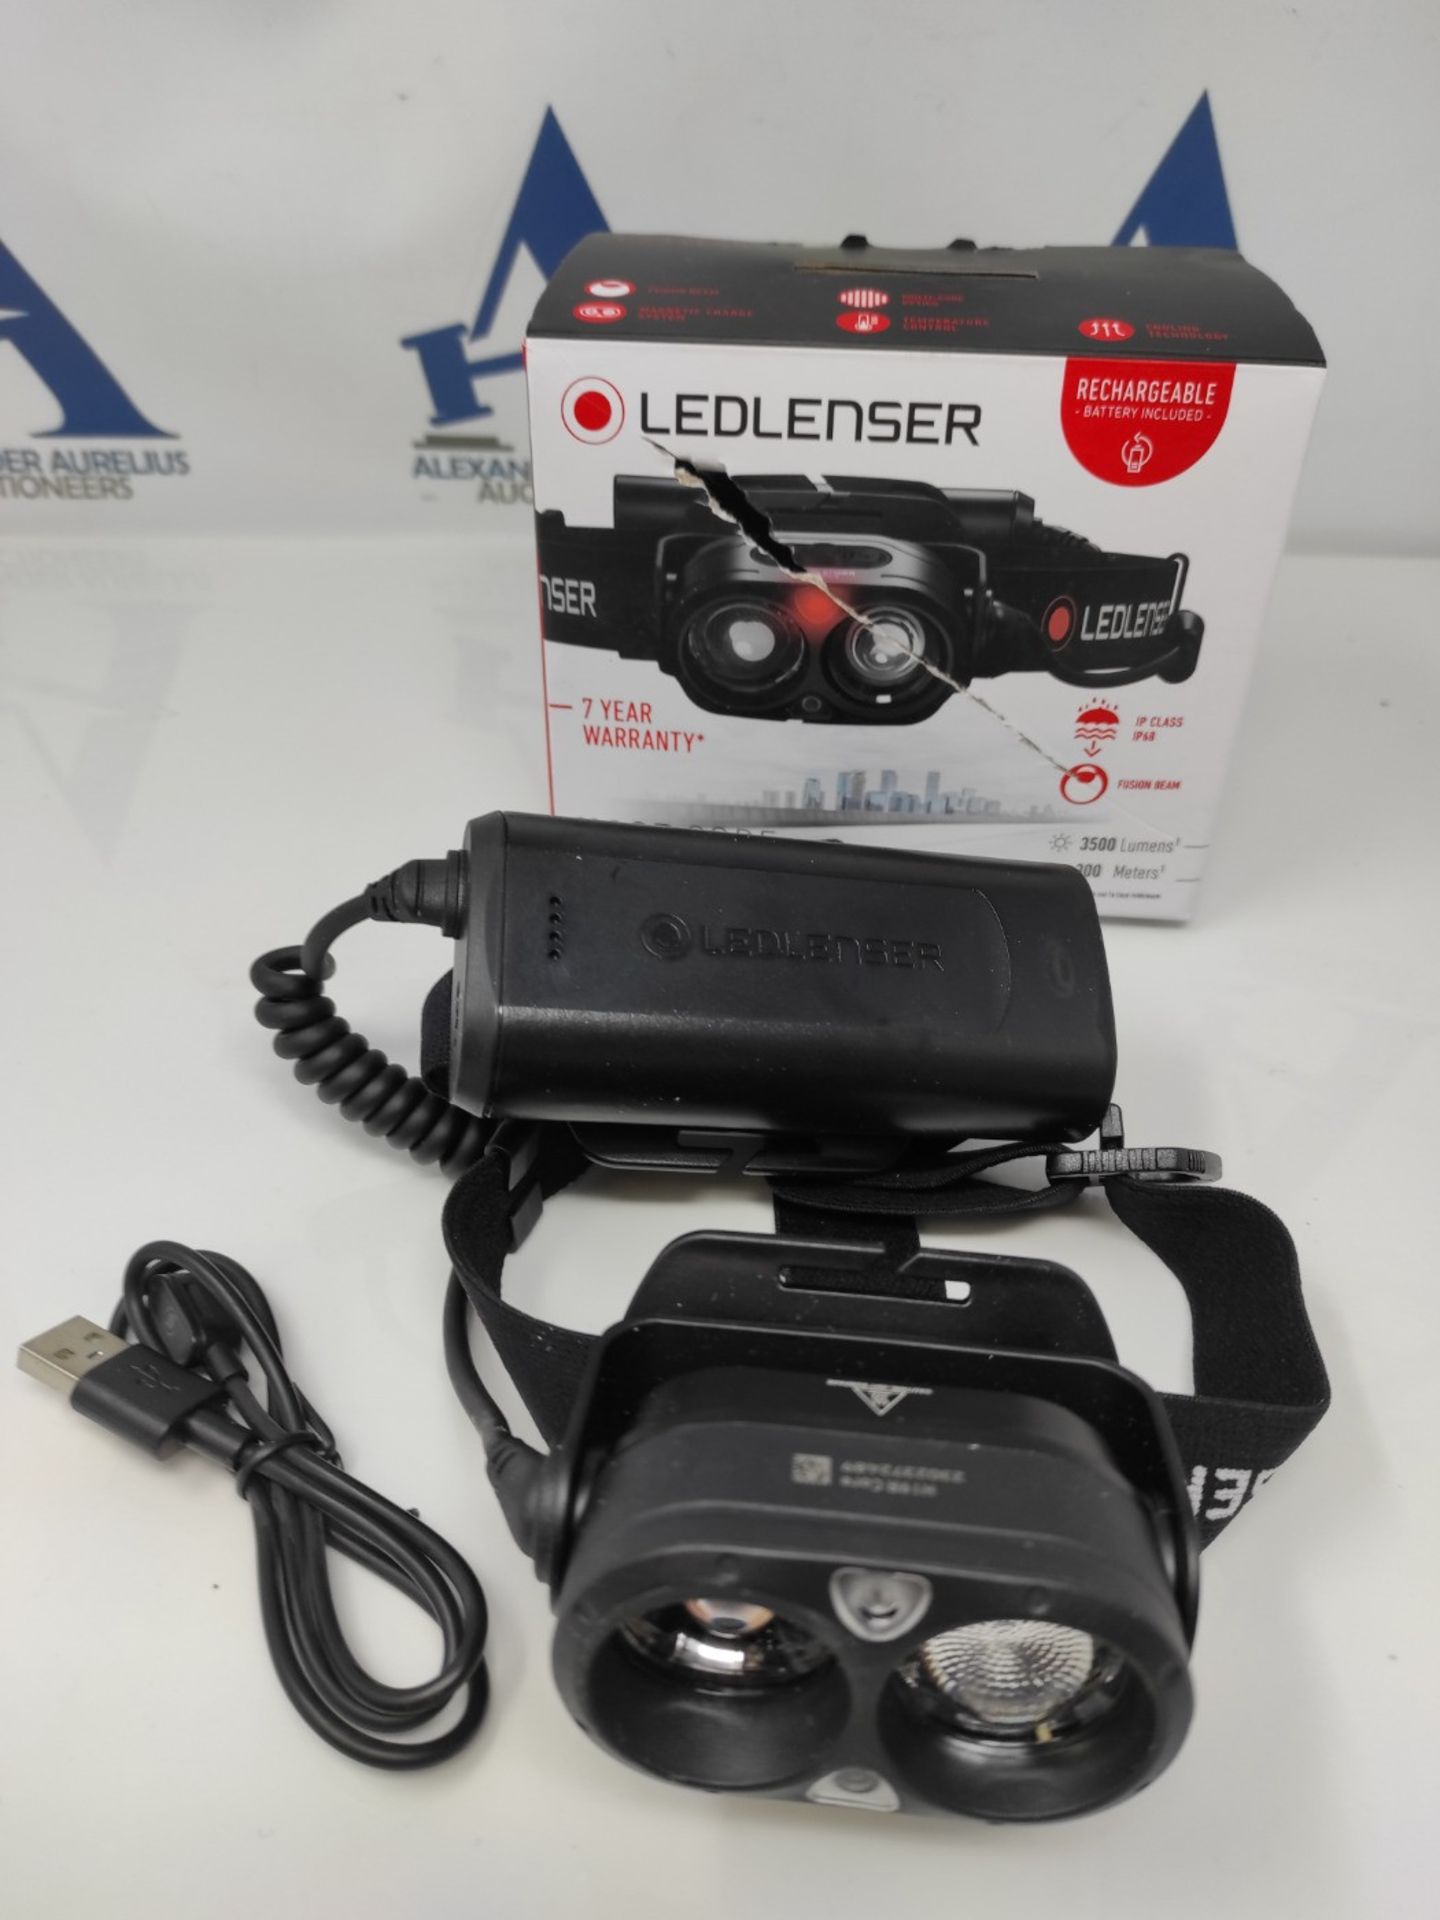 RRP £153.00 Ledlenser H19R Core - Rechargeable Outdoor LED Head Torch, Super Bright 3500 Lumens He - Image 2 of 2